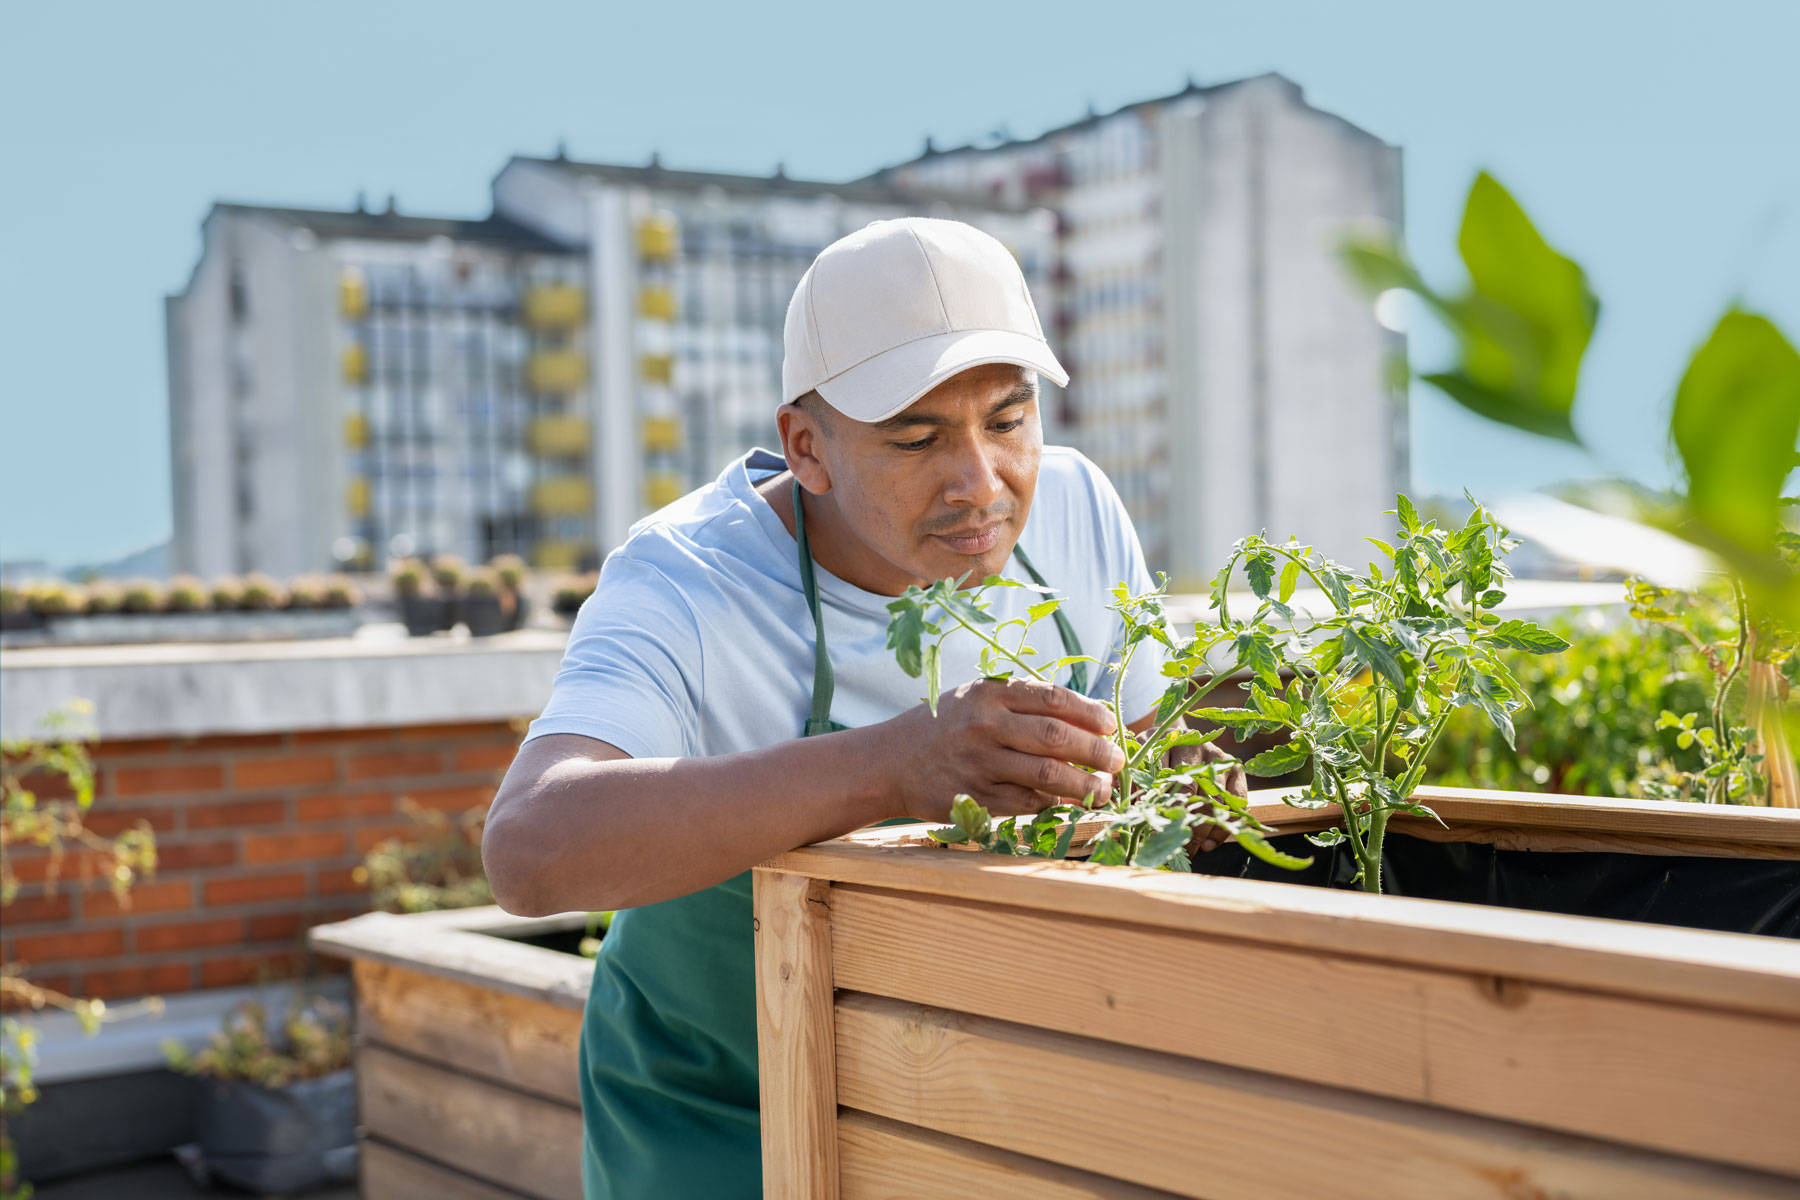 A man leaning over vegetable plants